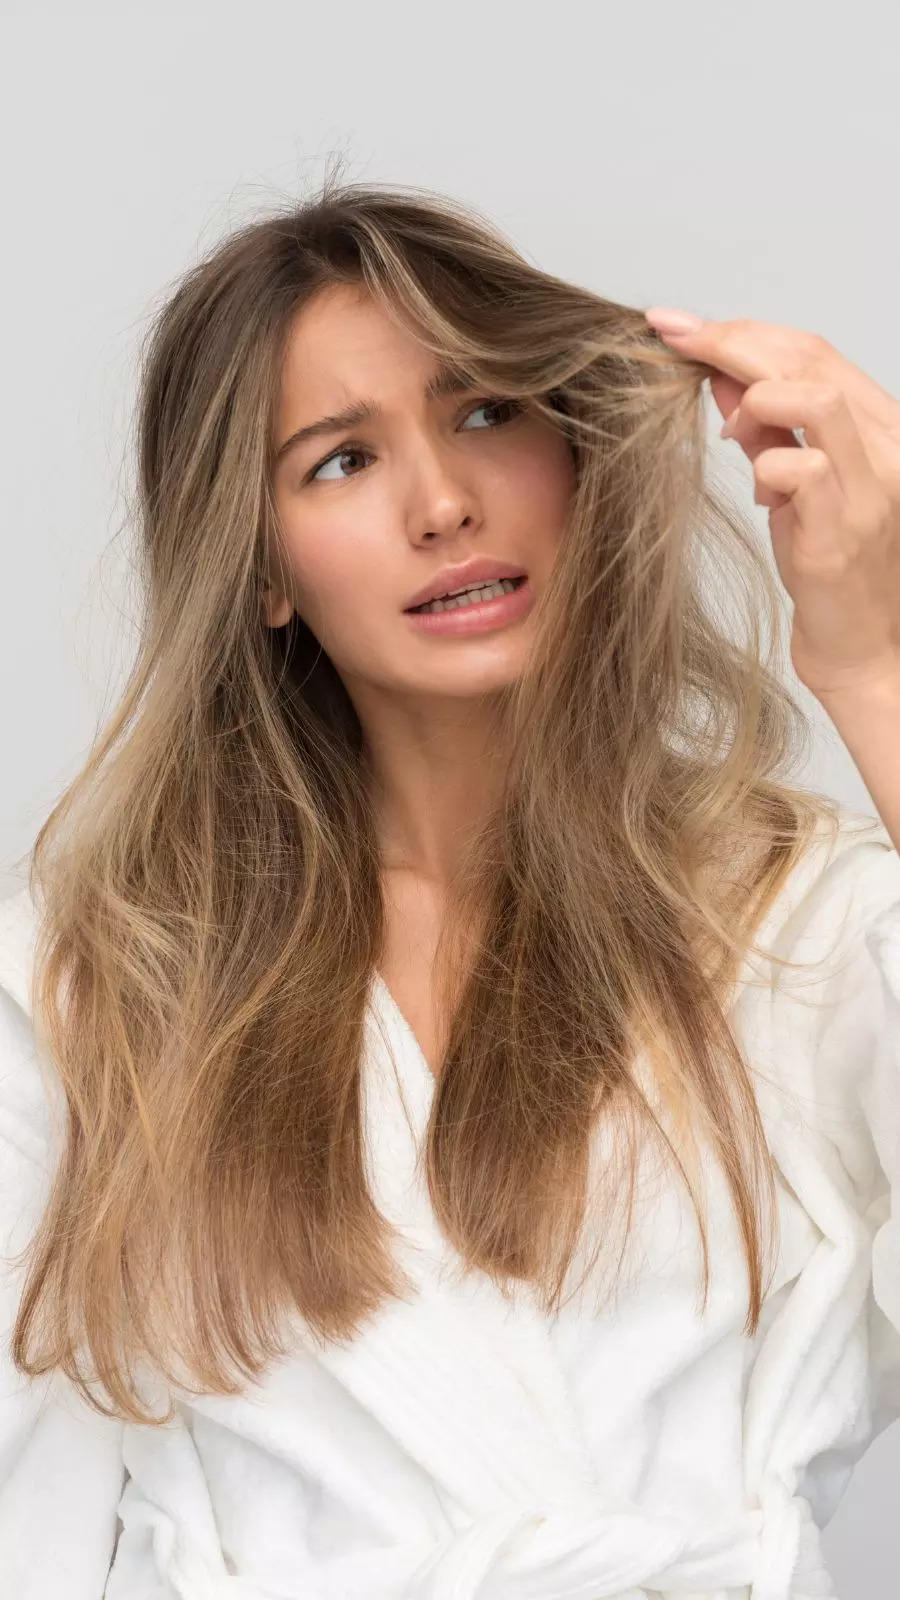 10 things to never do to your hair 